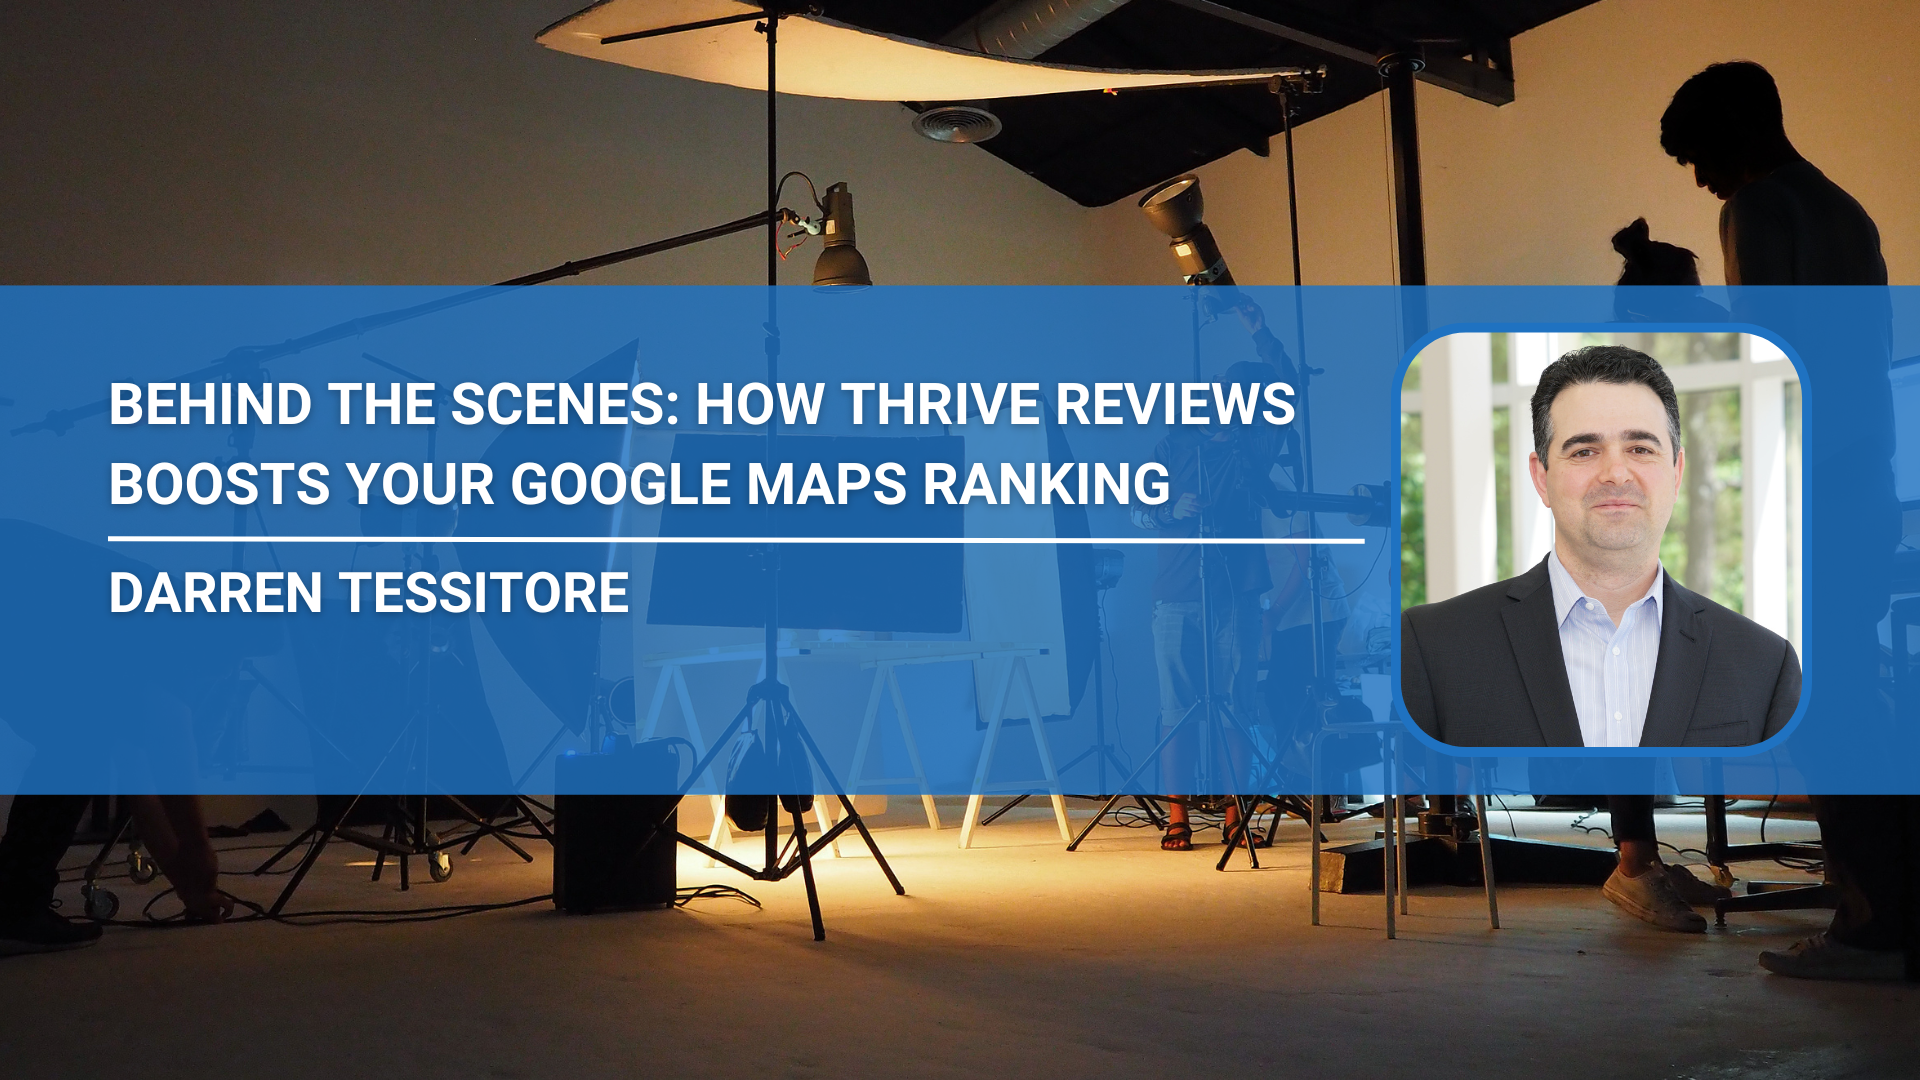 Behind the Scenes: How Thrive Reviews Boosts Your Google Maps Ranking